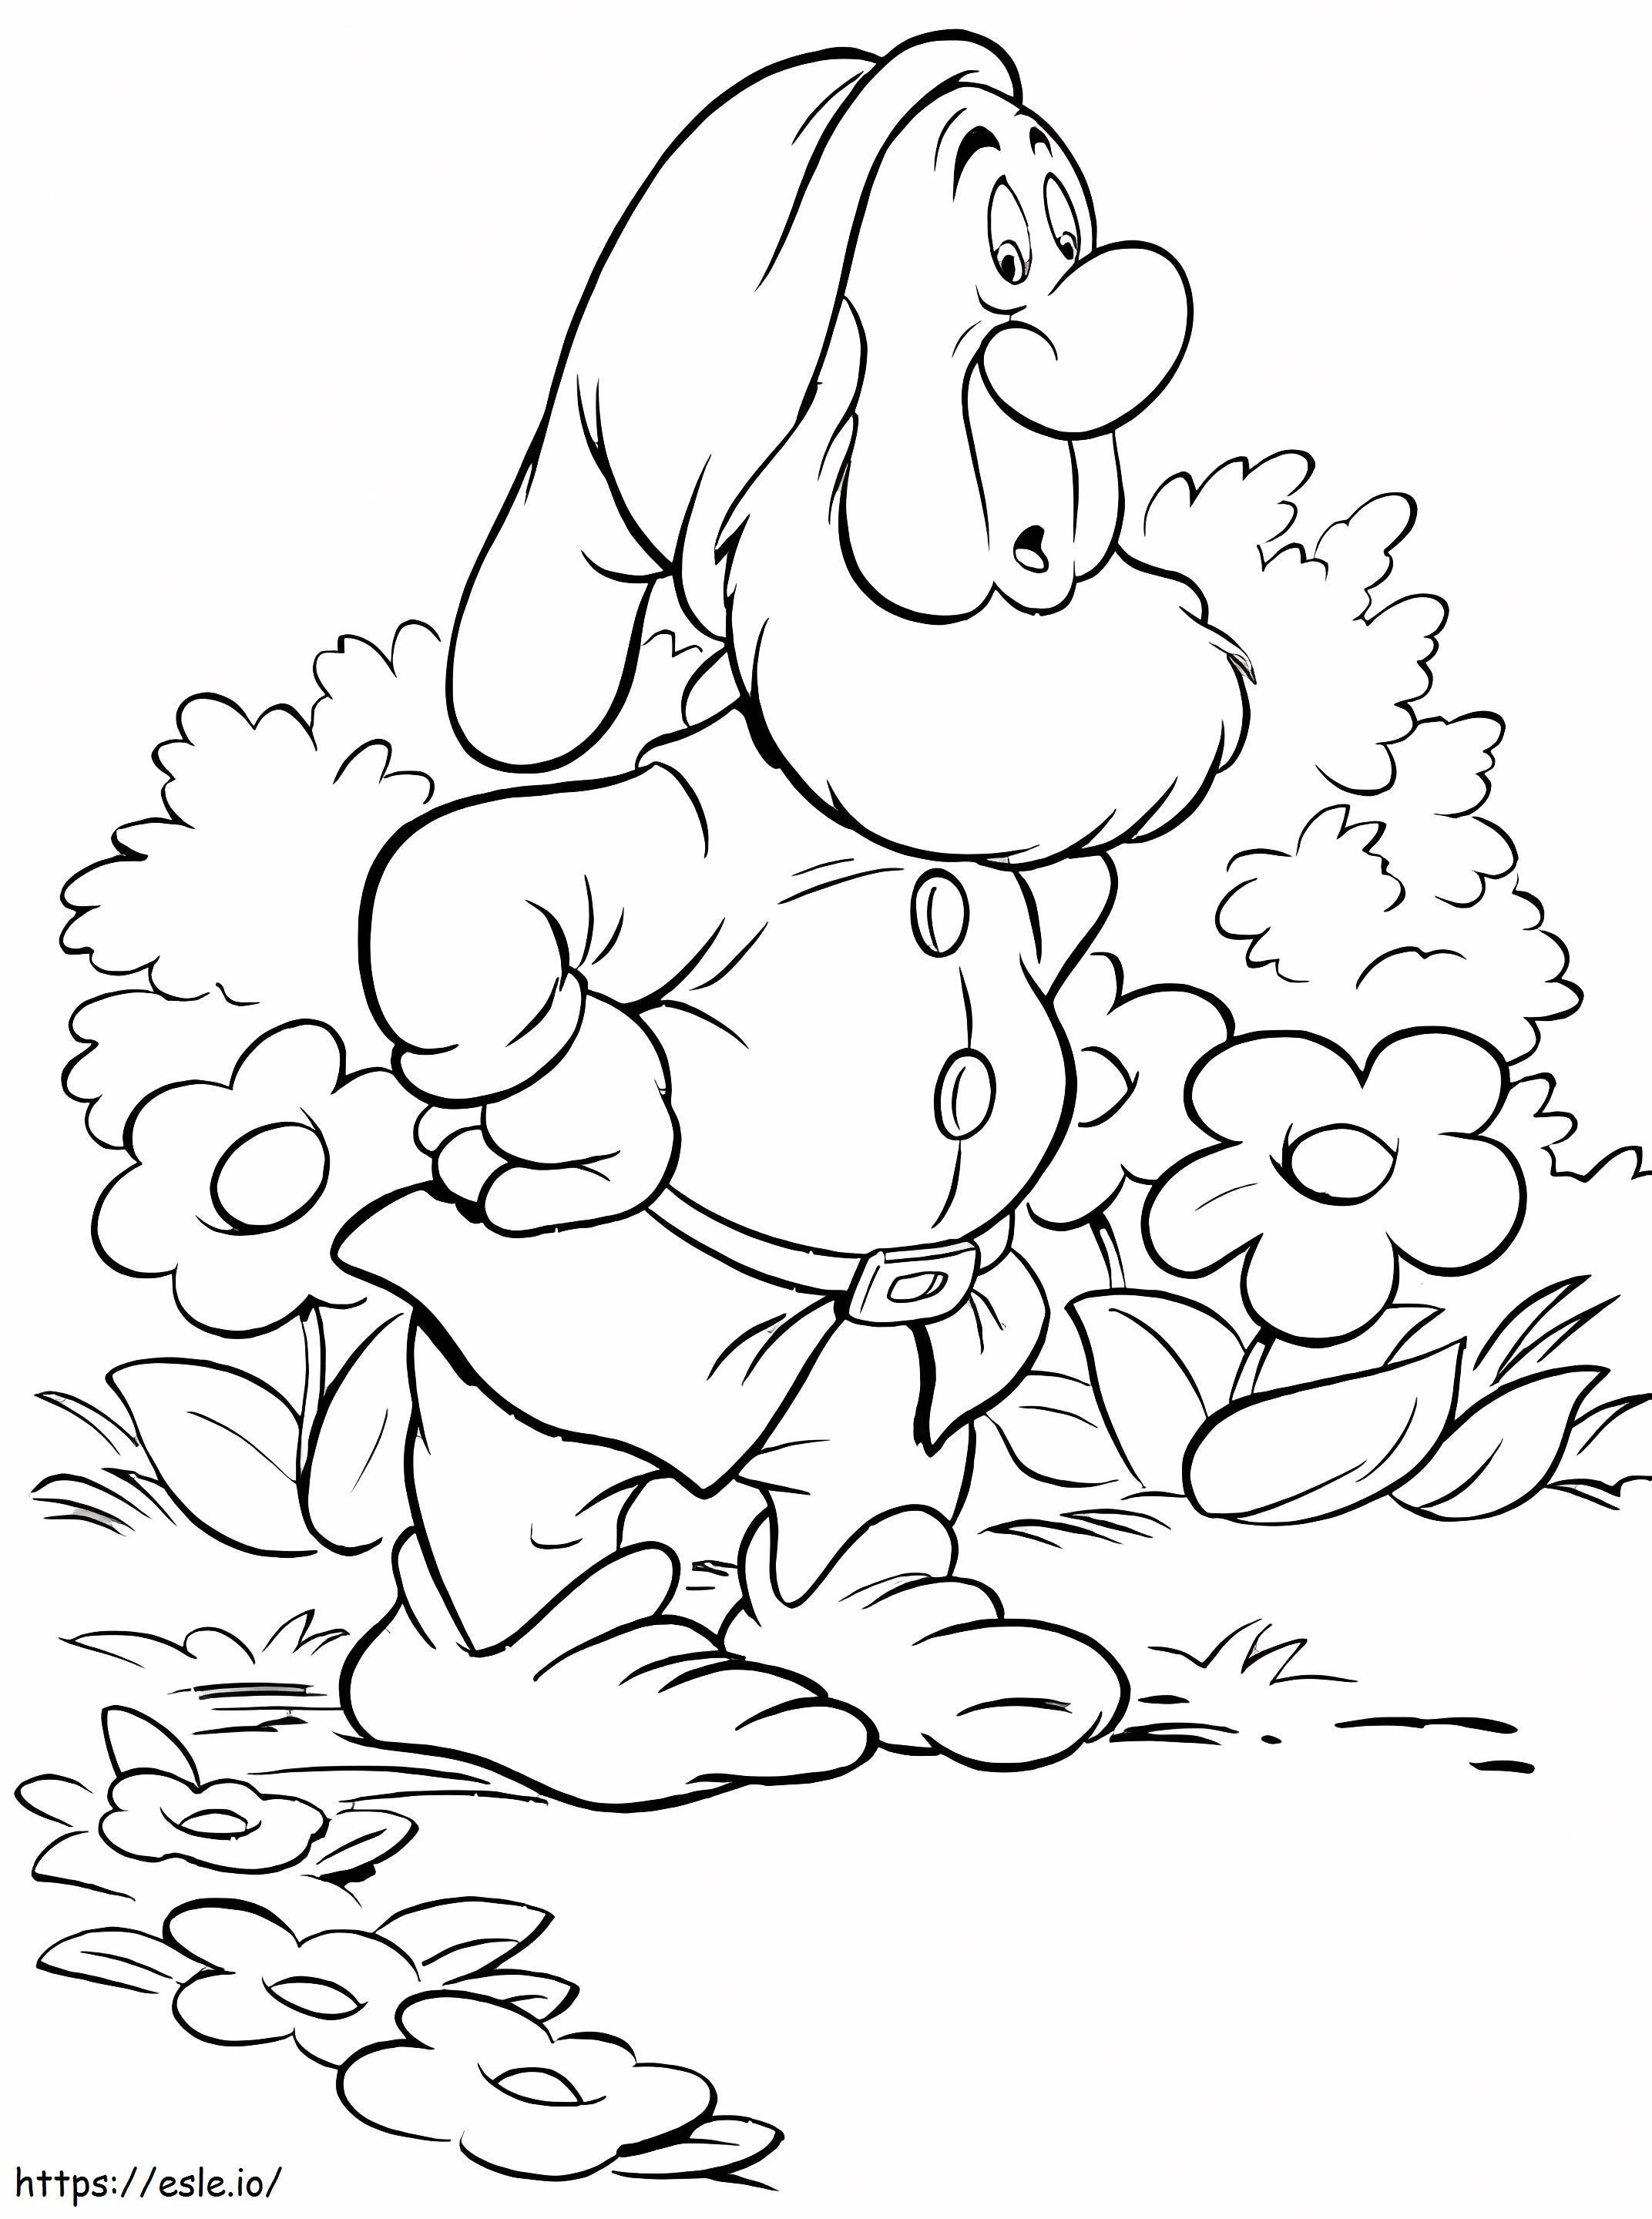 Sneezy Dwarf coloring page